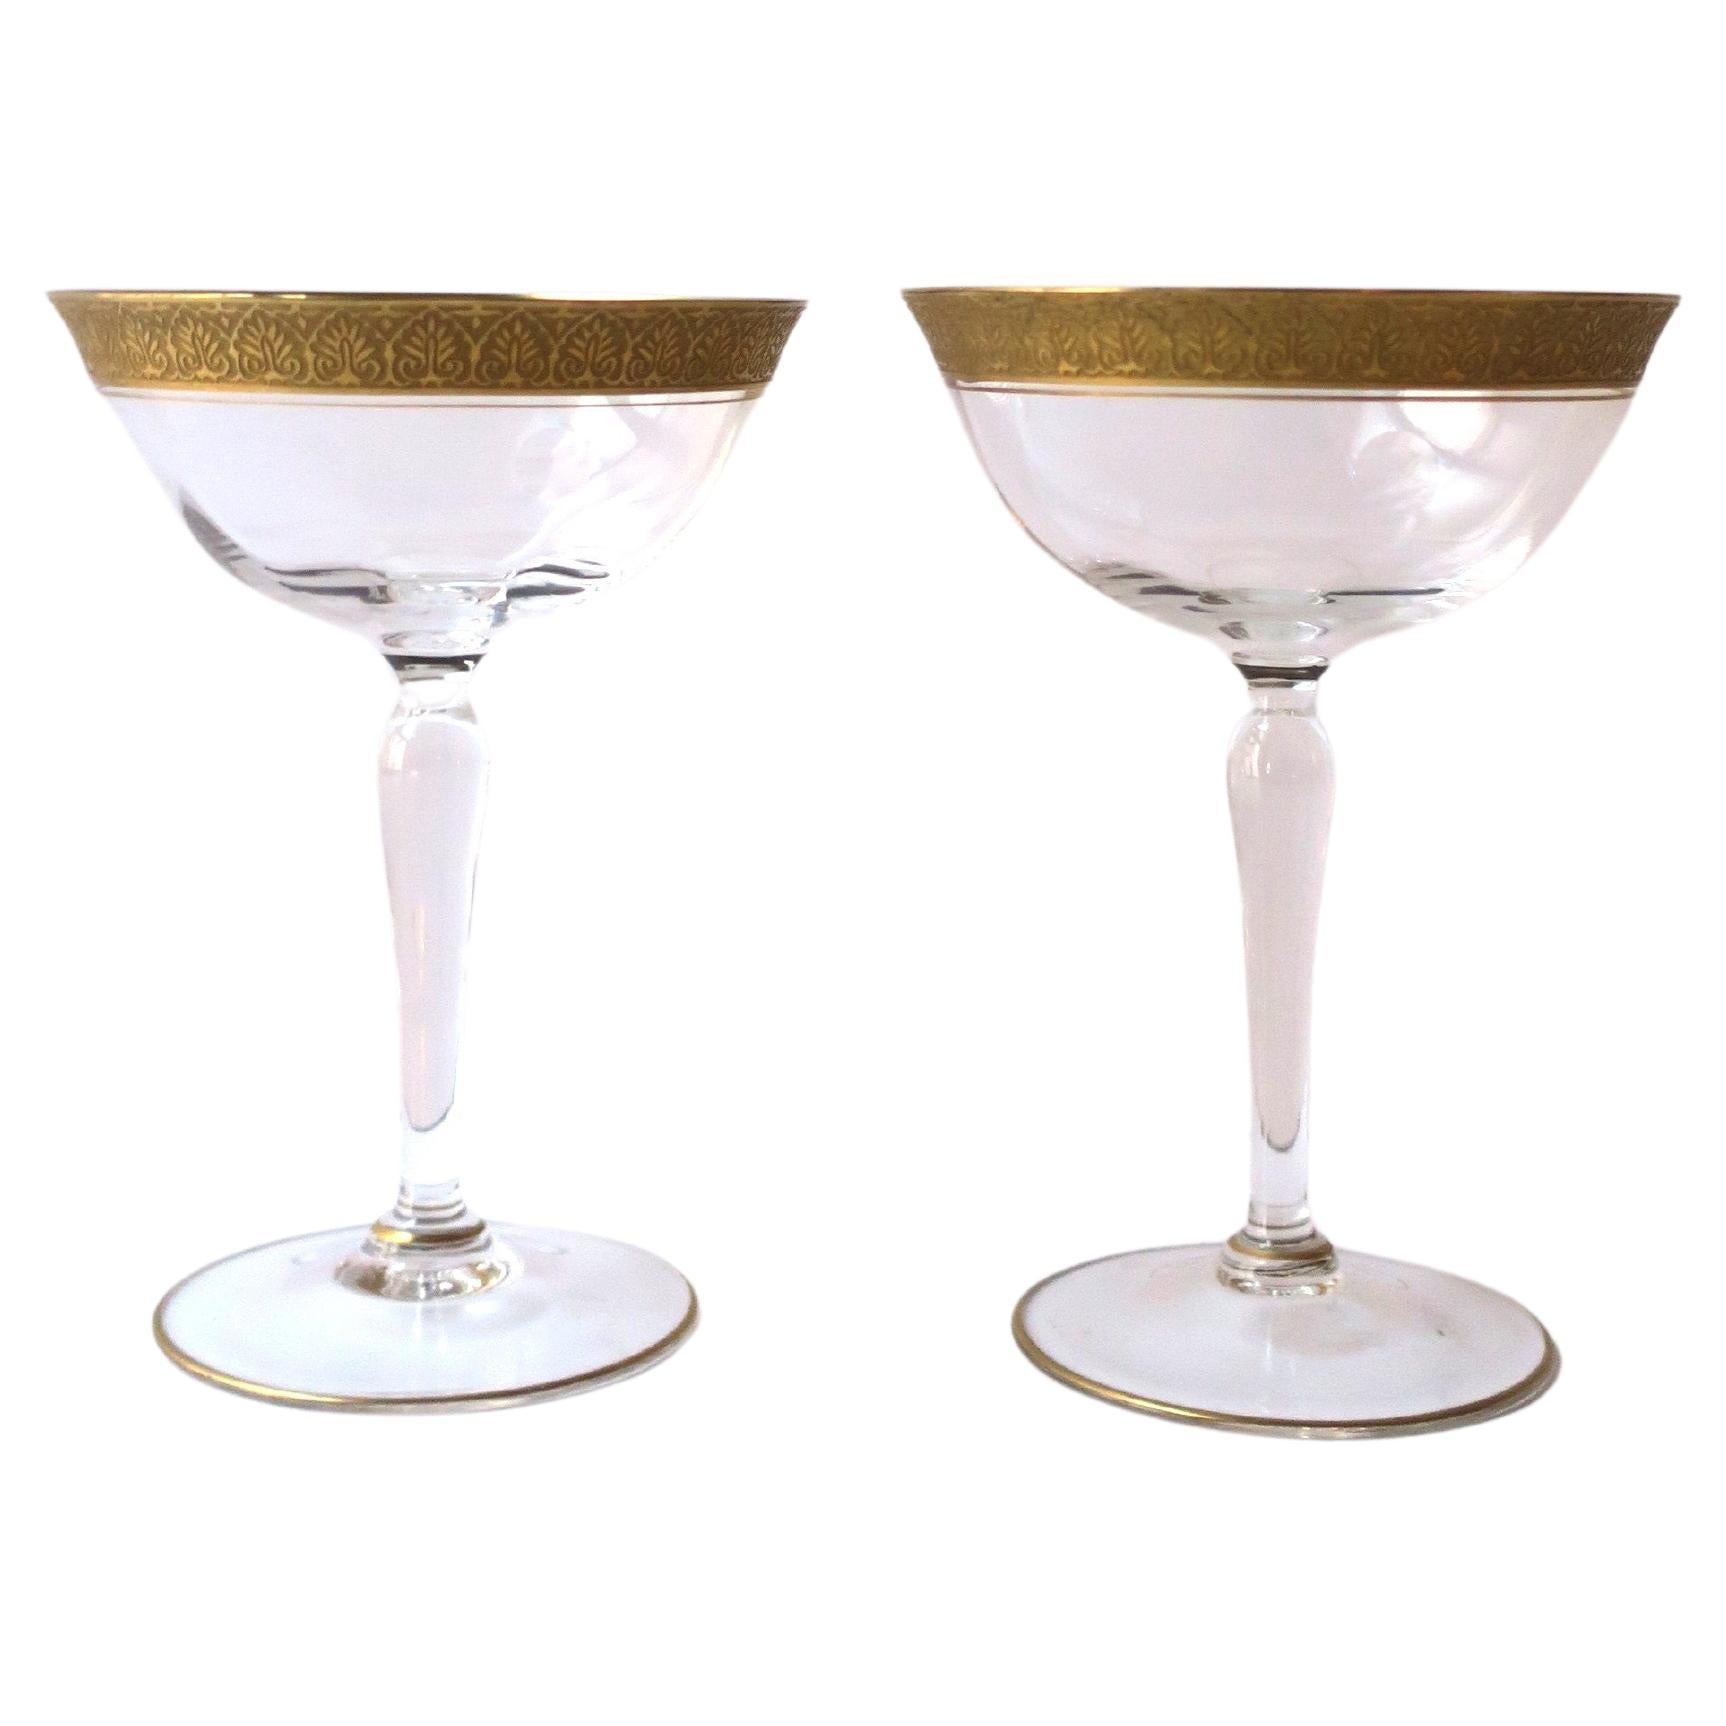 Champagne Coupes Cocktail Glasses with Gold Rim, Pair For Sale